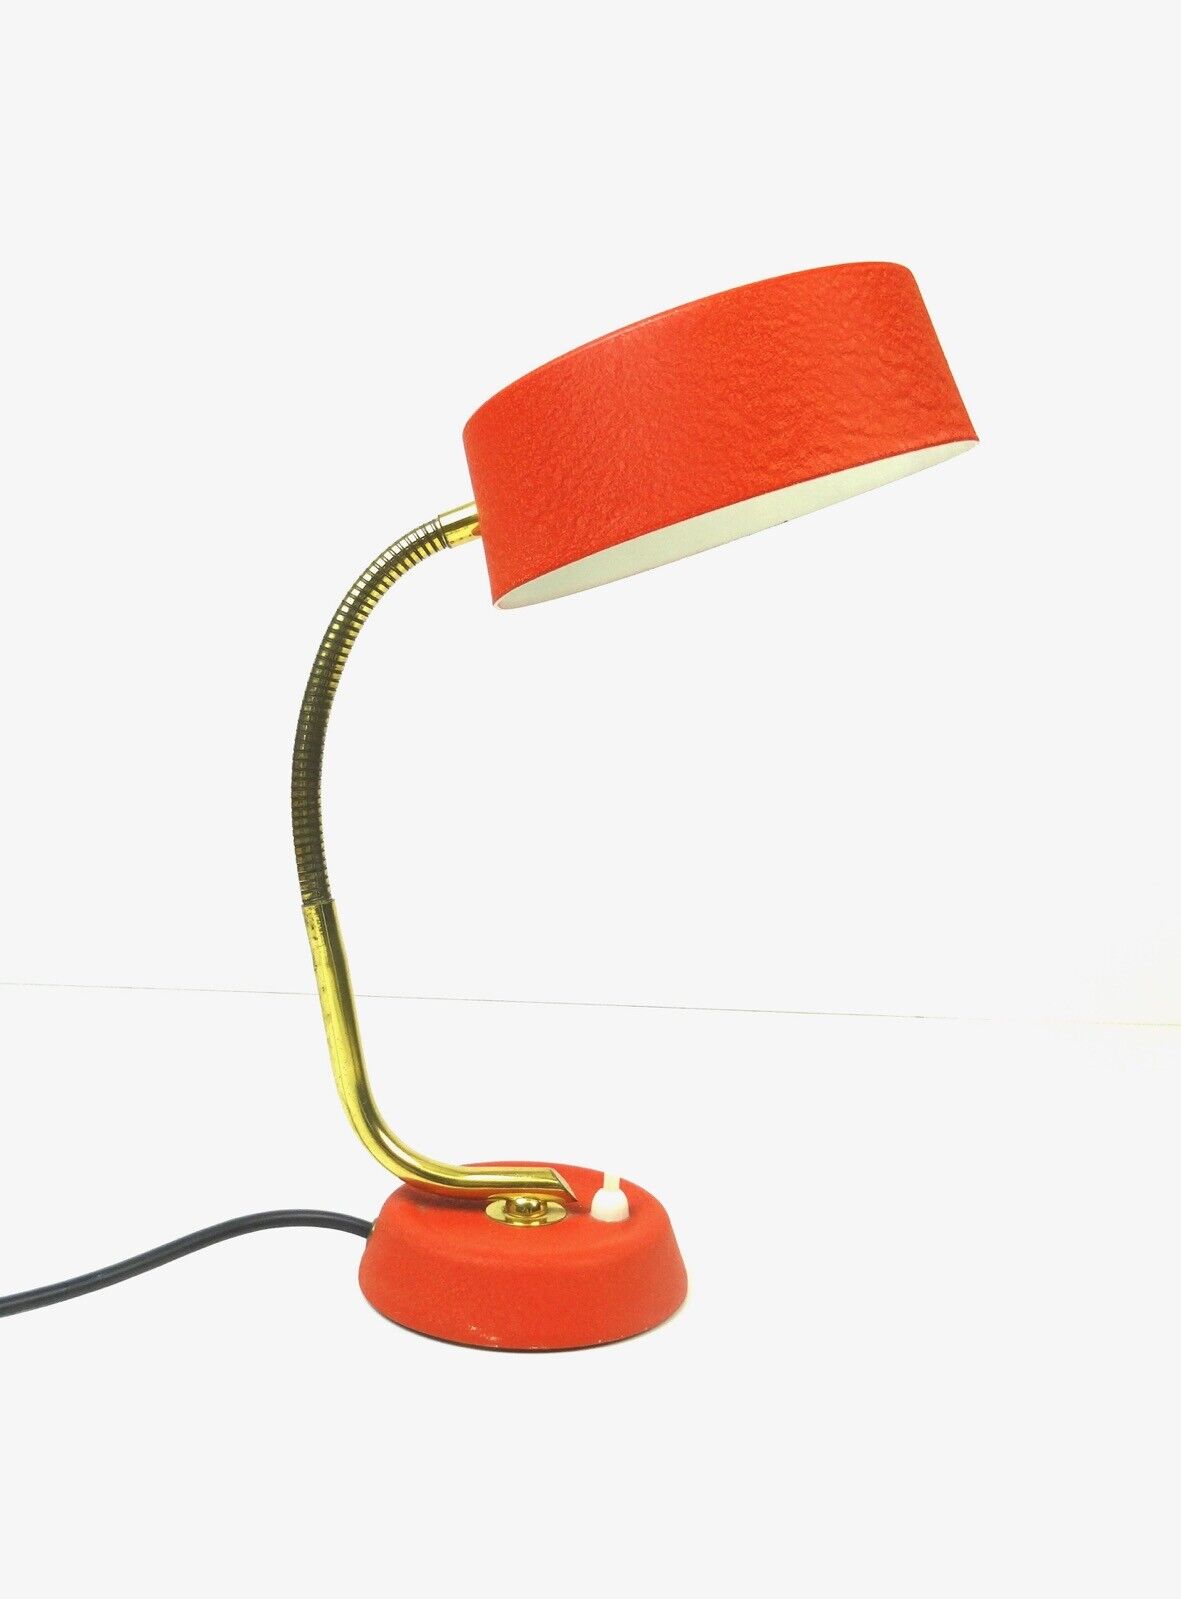 RARE FIRE RED METAL & BRASS MID CENTURY VINTAGE DESK LAMP BY COSACK GERMANY 1950